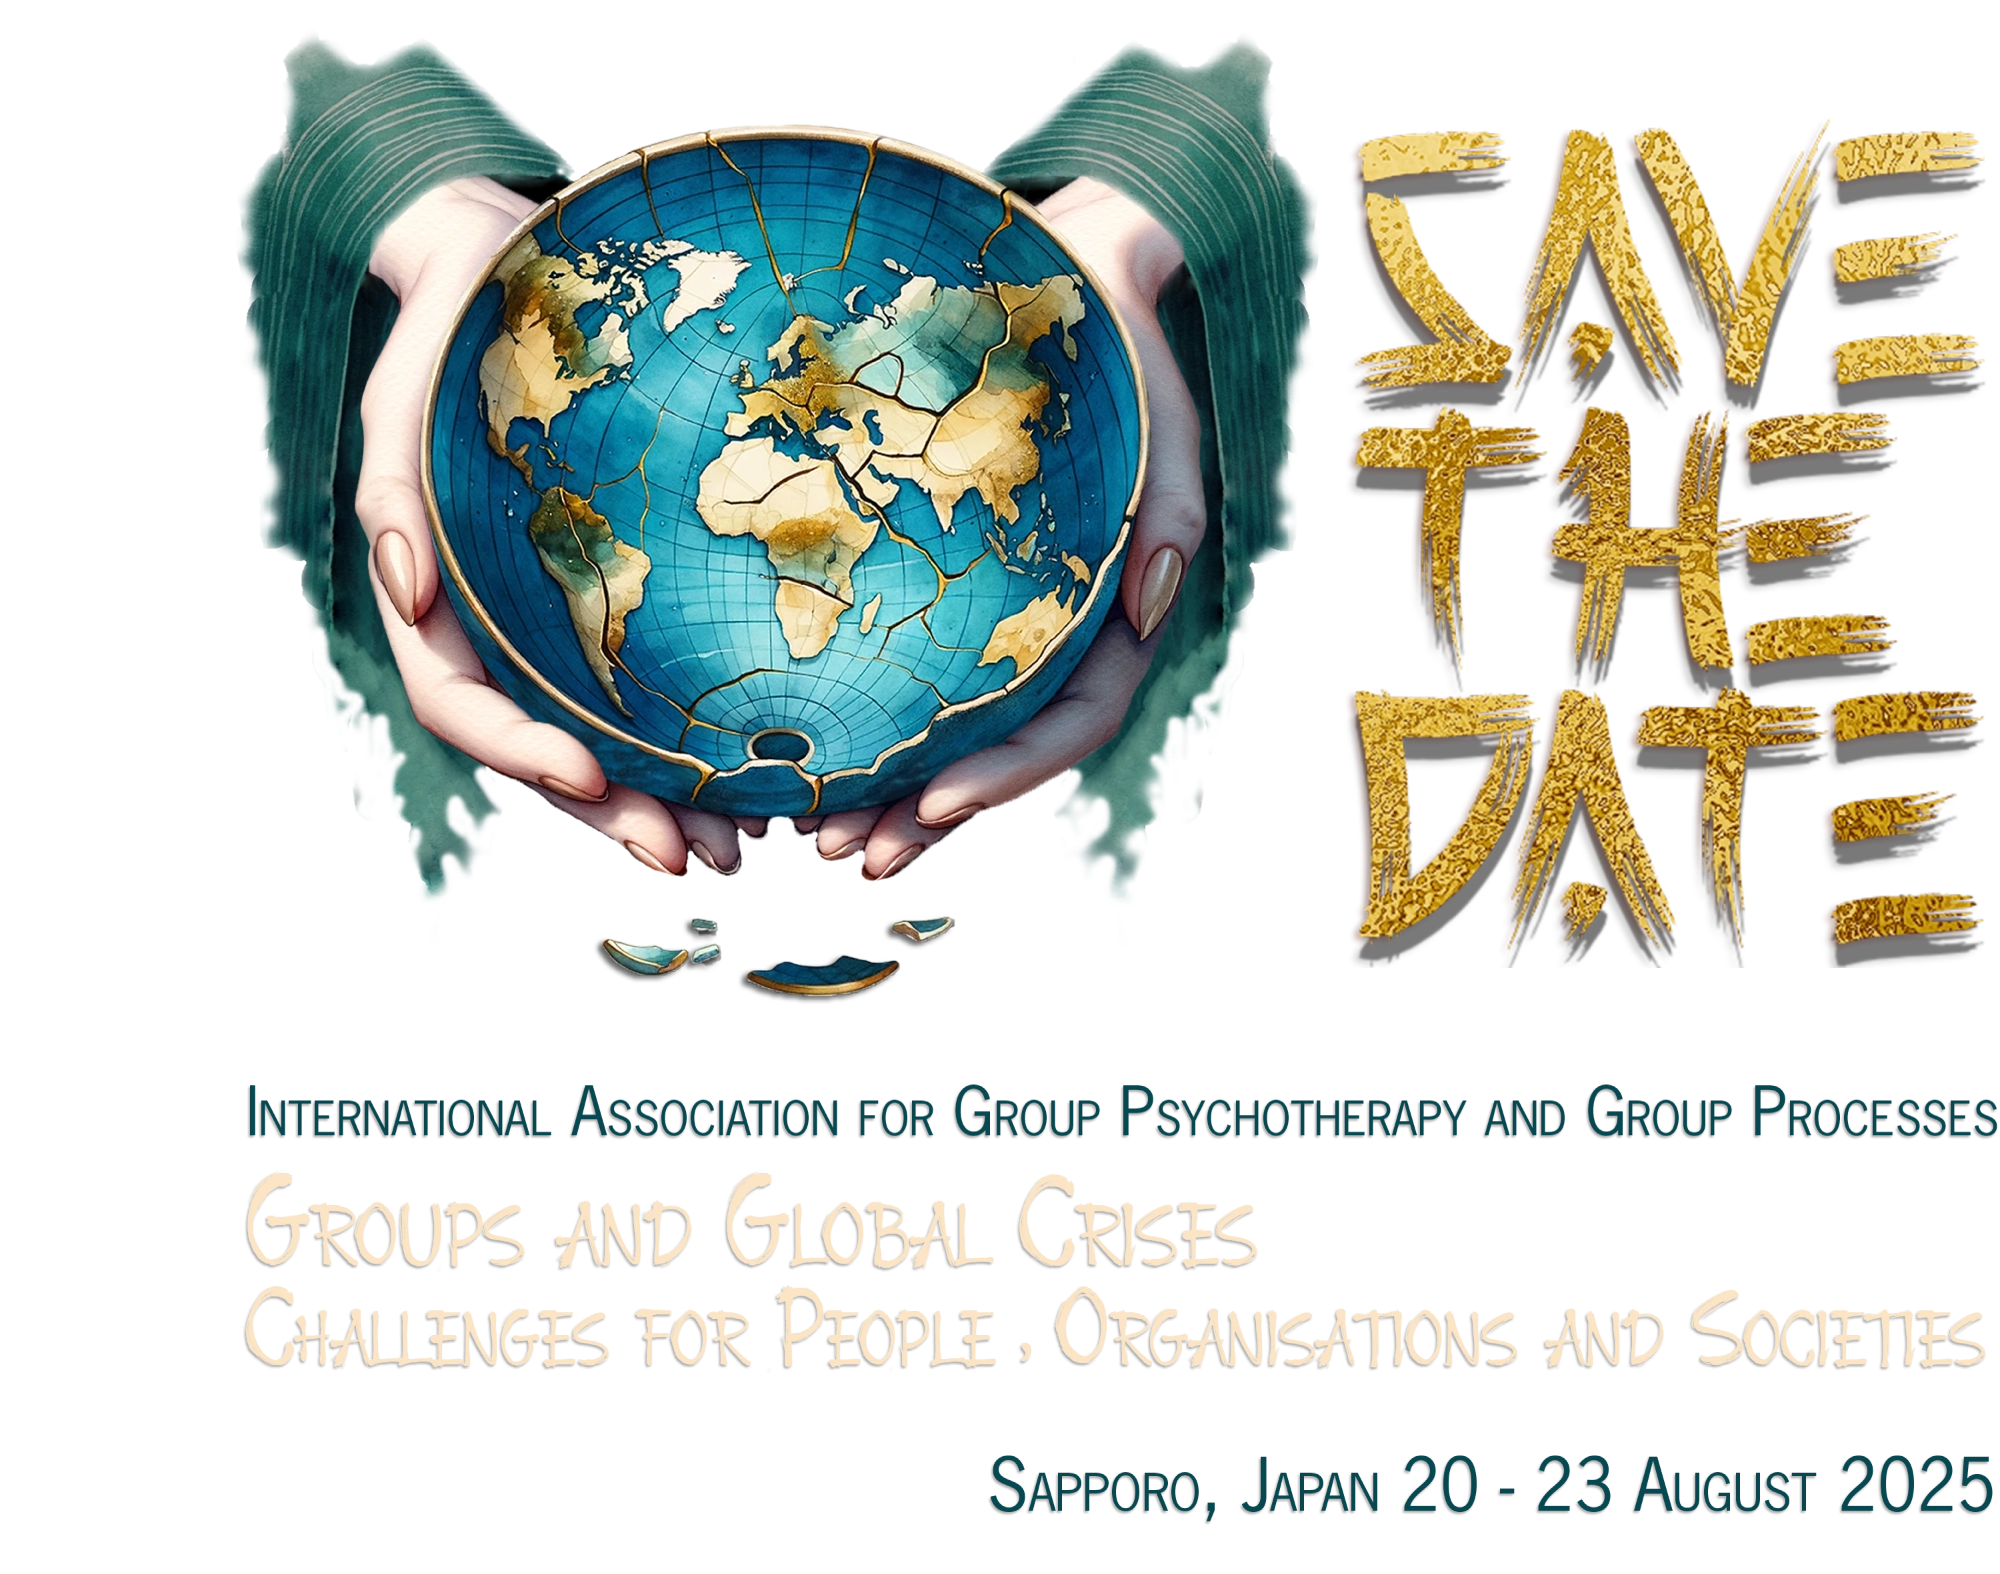 SAVE THE DATE International Association for Croup Psychotherapy and Group Processes GROUPS AND GLOBAL CRISES CHALLENGES FOR PEOPLE,ORGANISATIONS AND SOCIETIES Sapparo, Japan 20 - 23 August 2025